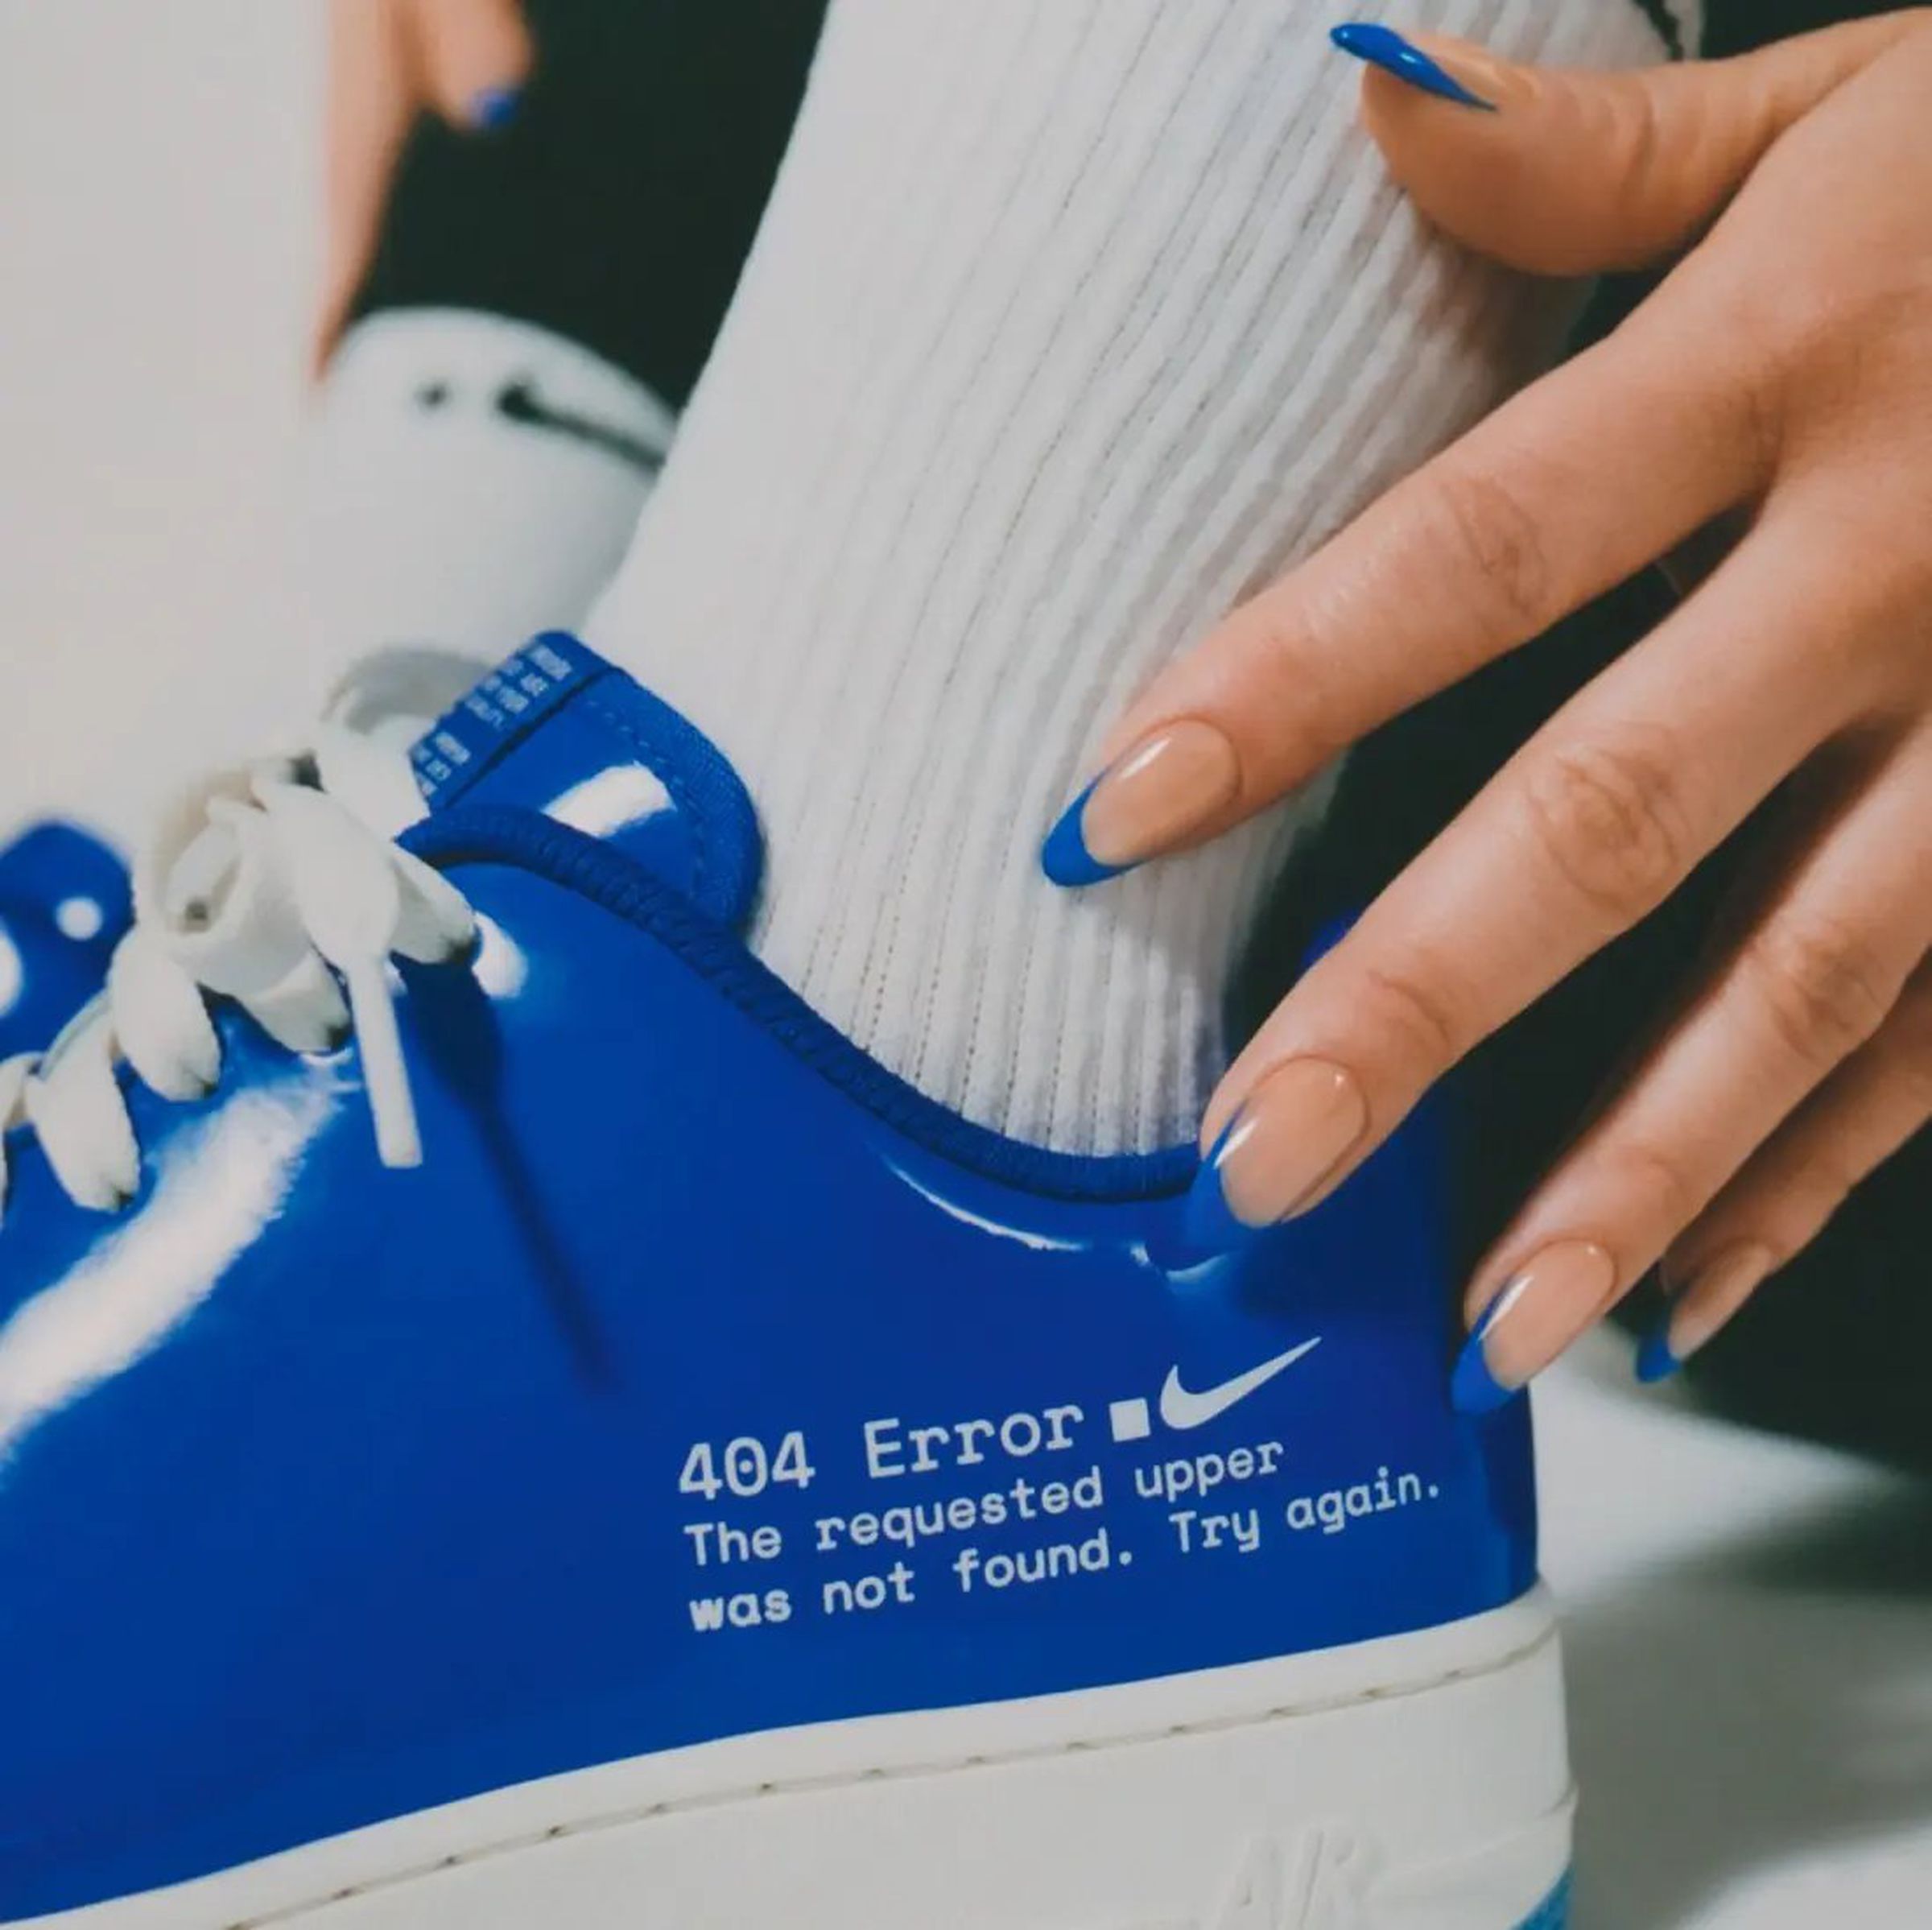 Close-up of blue Nike low-top shoe with print on the side reading “404 Error. The requested upper was not found. Try again.”